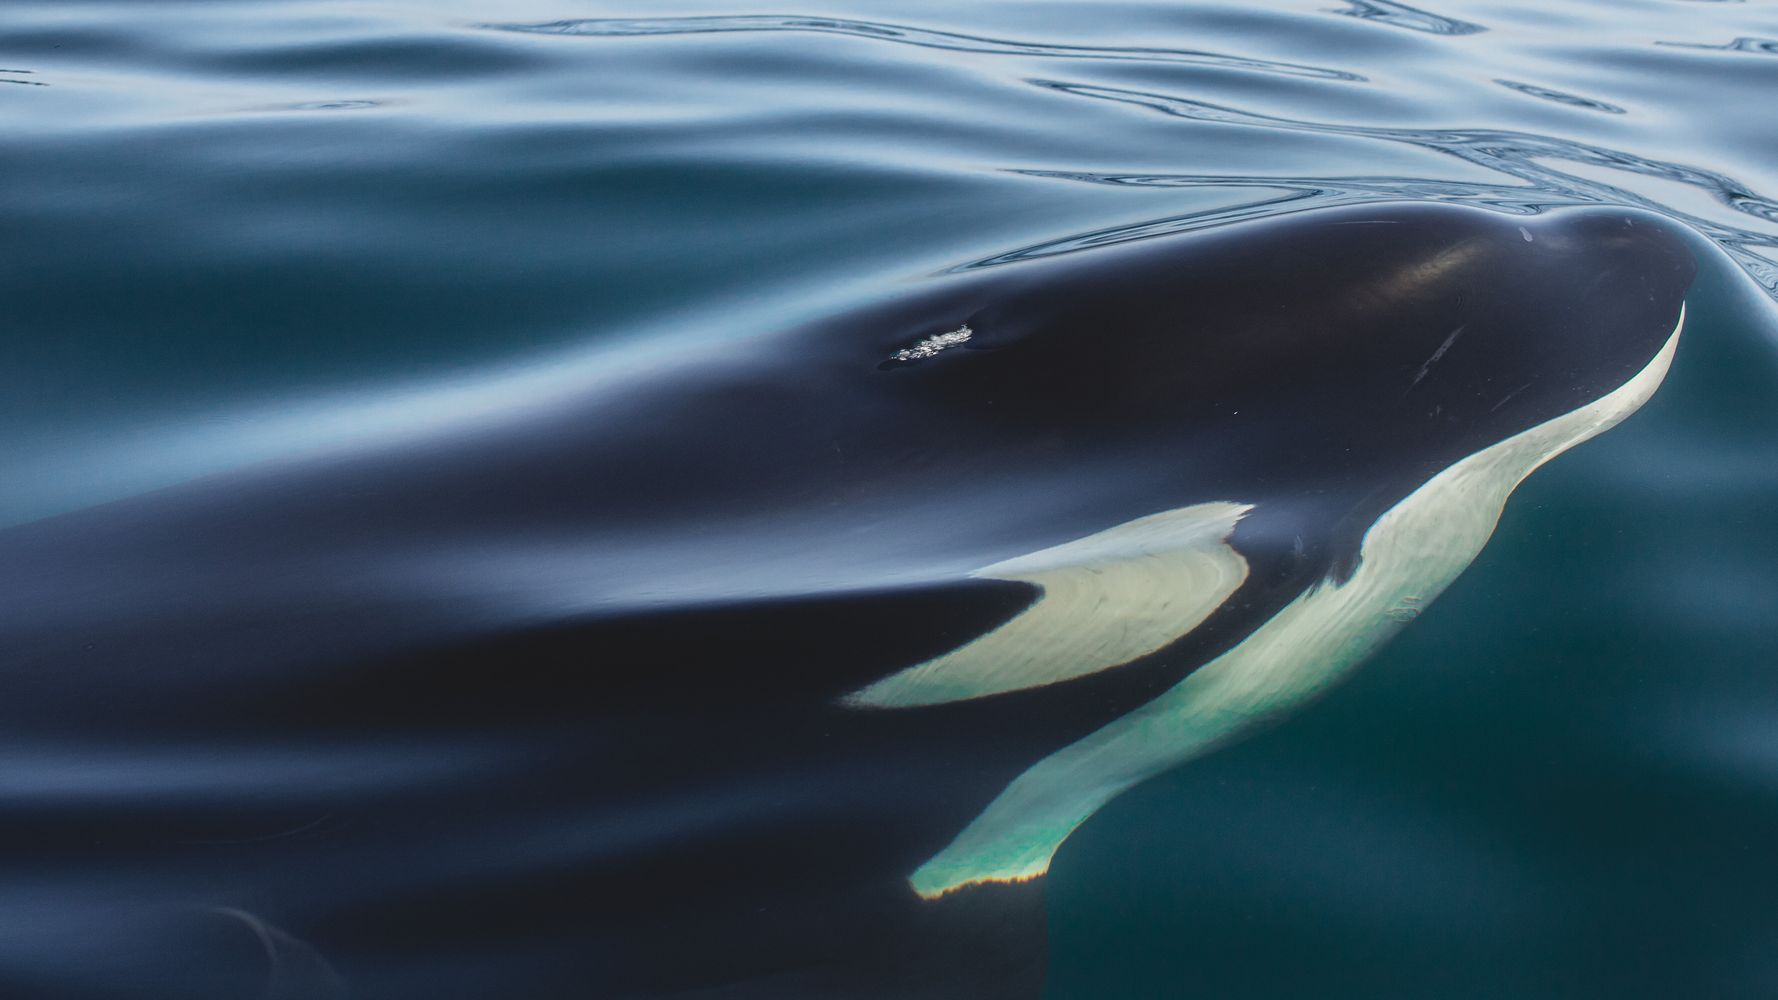 Orcas Wreck Sailing Boat In Latest Incident Off Coast Of Spain | HuffPost  Impact